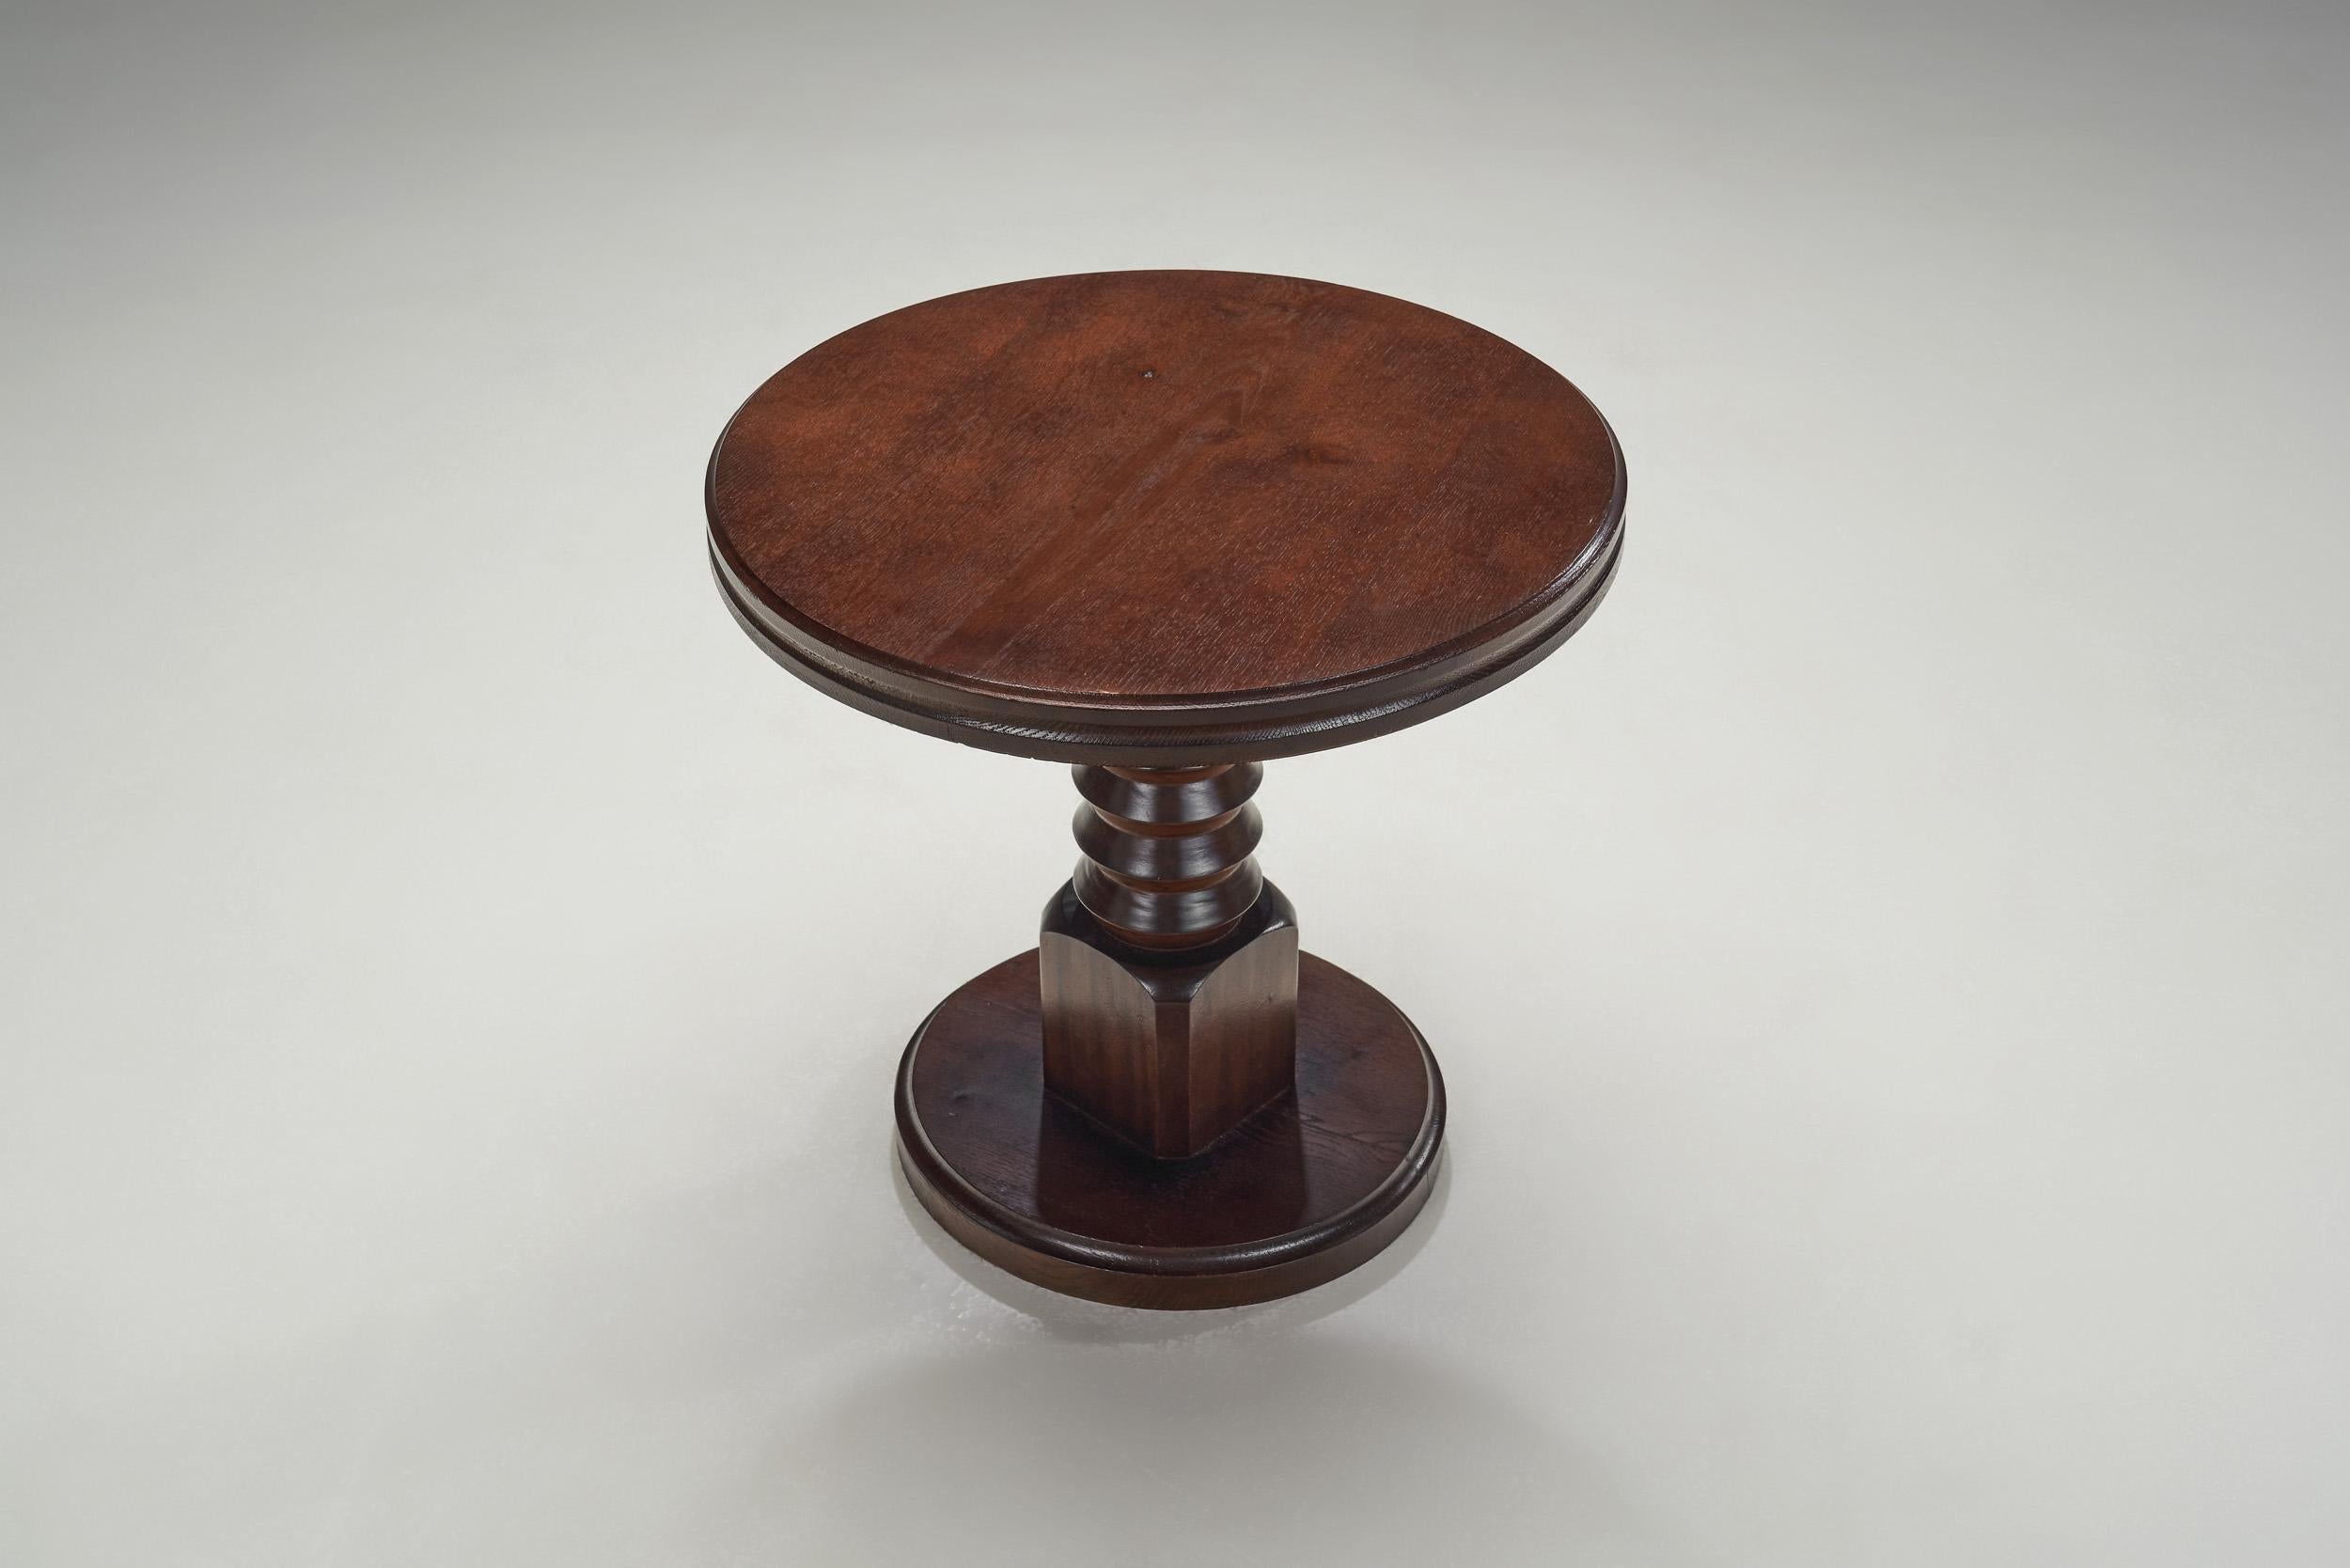 Mid-20th Century Sculptural Solid Wood Side Table with Column Base, Europe ca 1940s For Sale